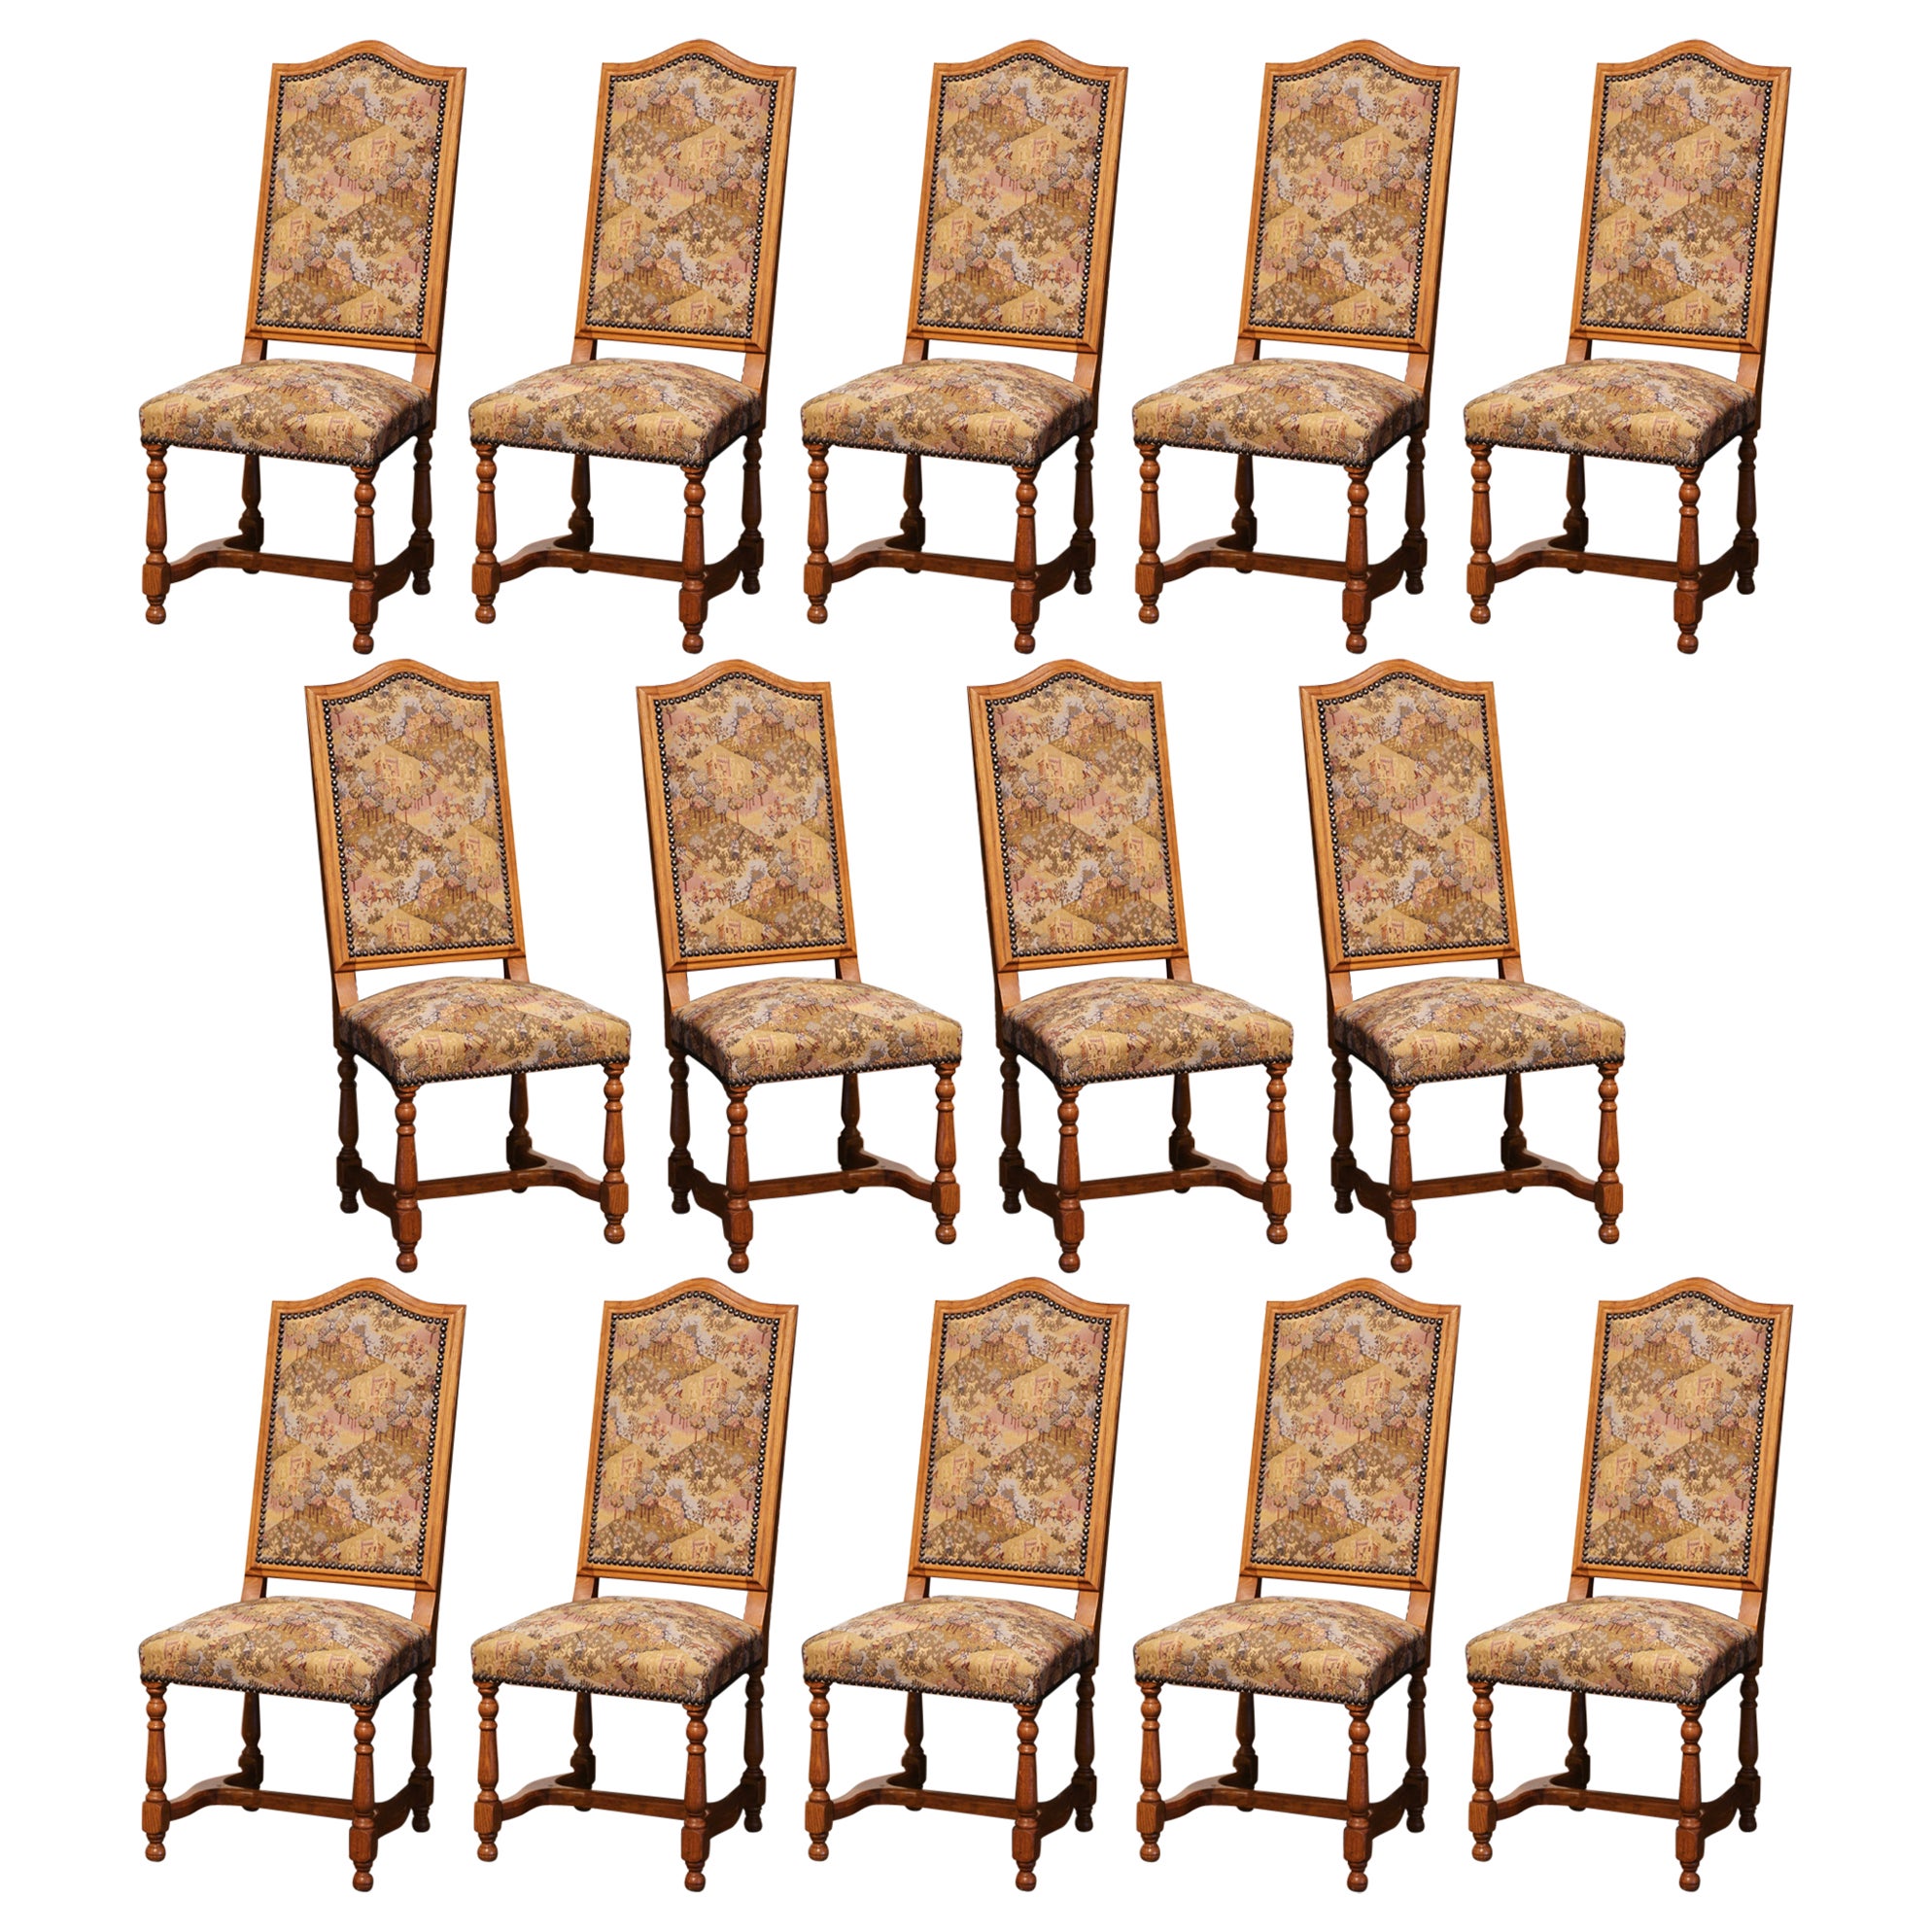 20th Century French Louis XIV Carved Oak Dining Room, Suite of 14 Chairs